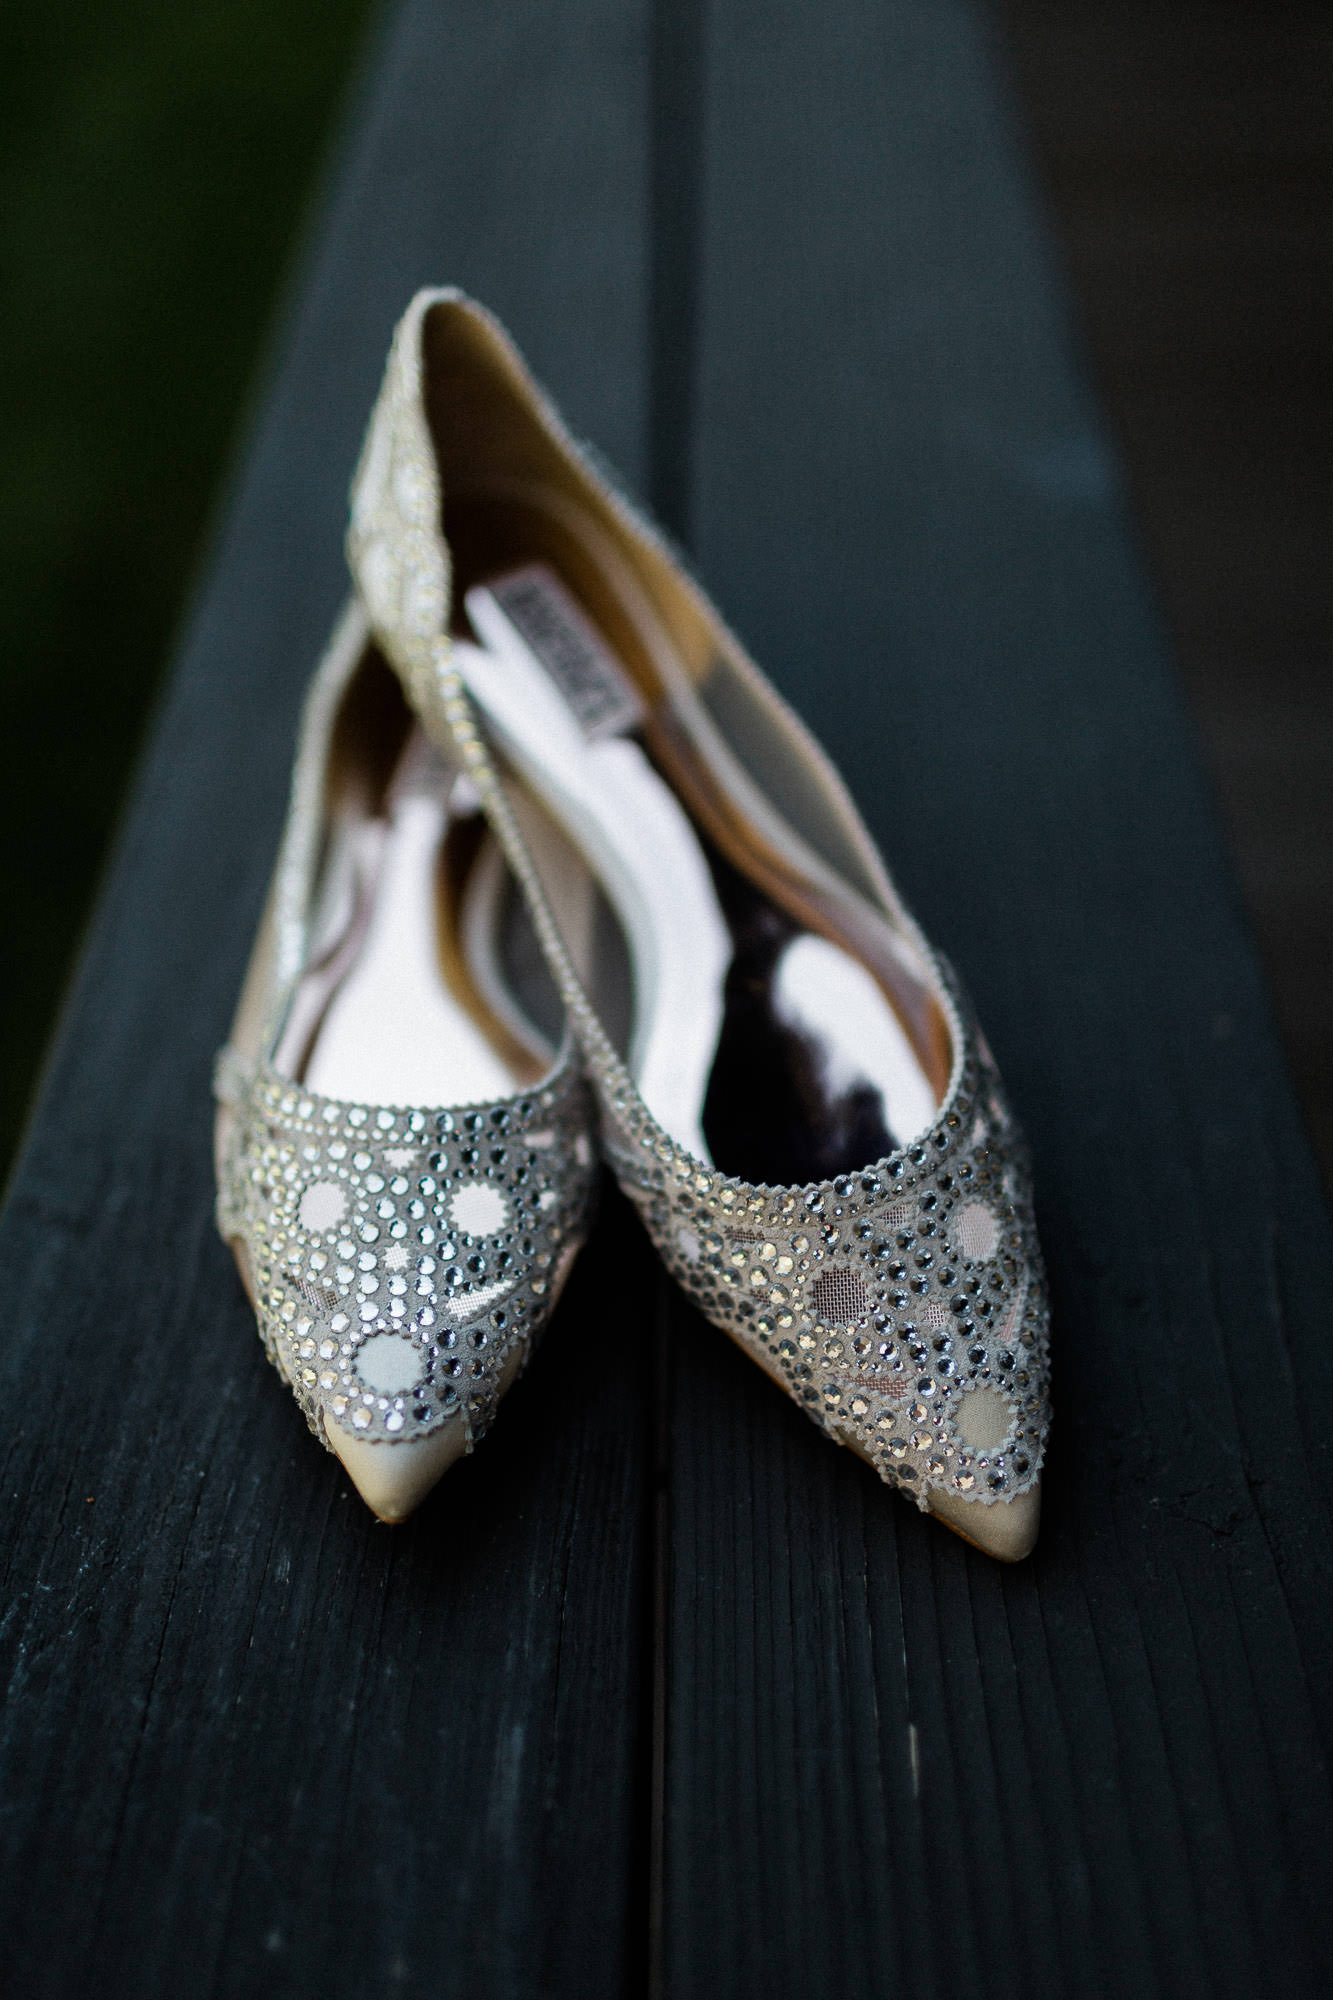 The bride's shoes rest on the deck at Sunriver Resort in Oregon